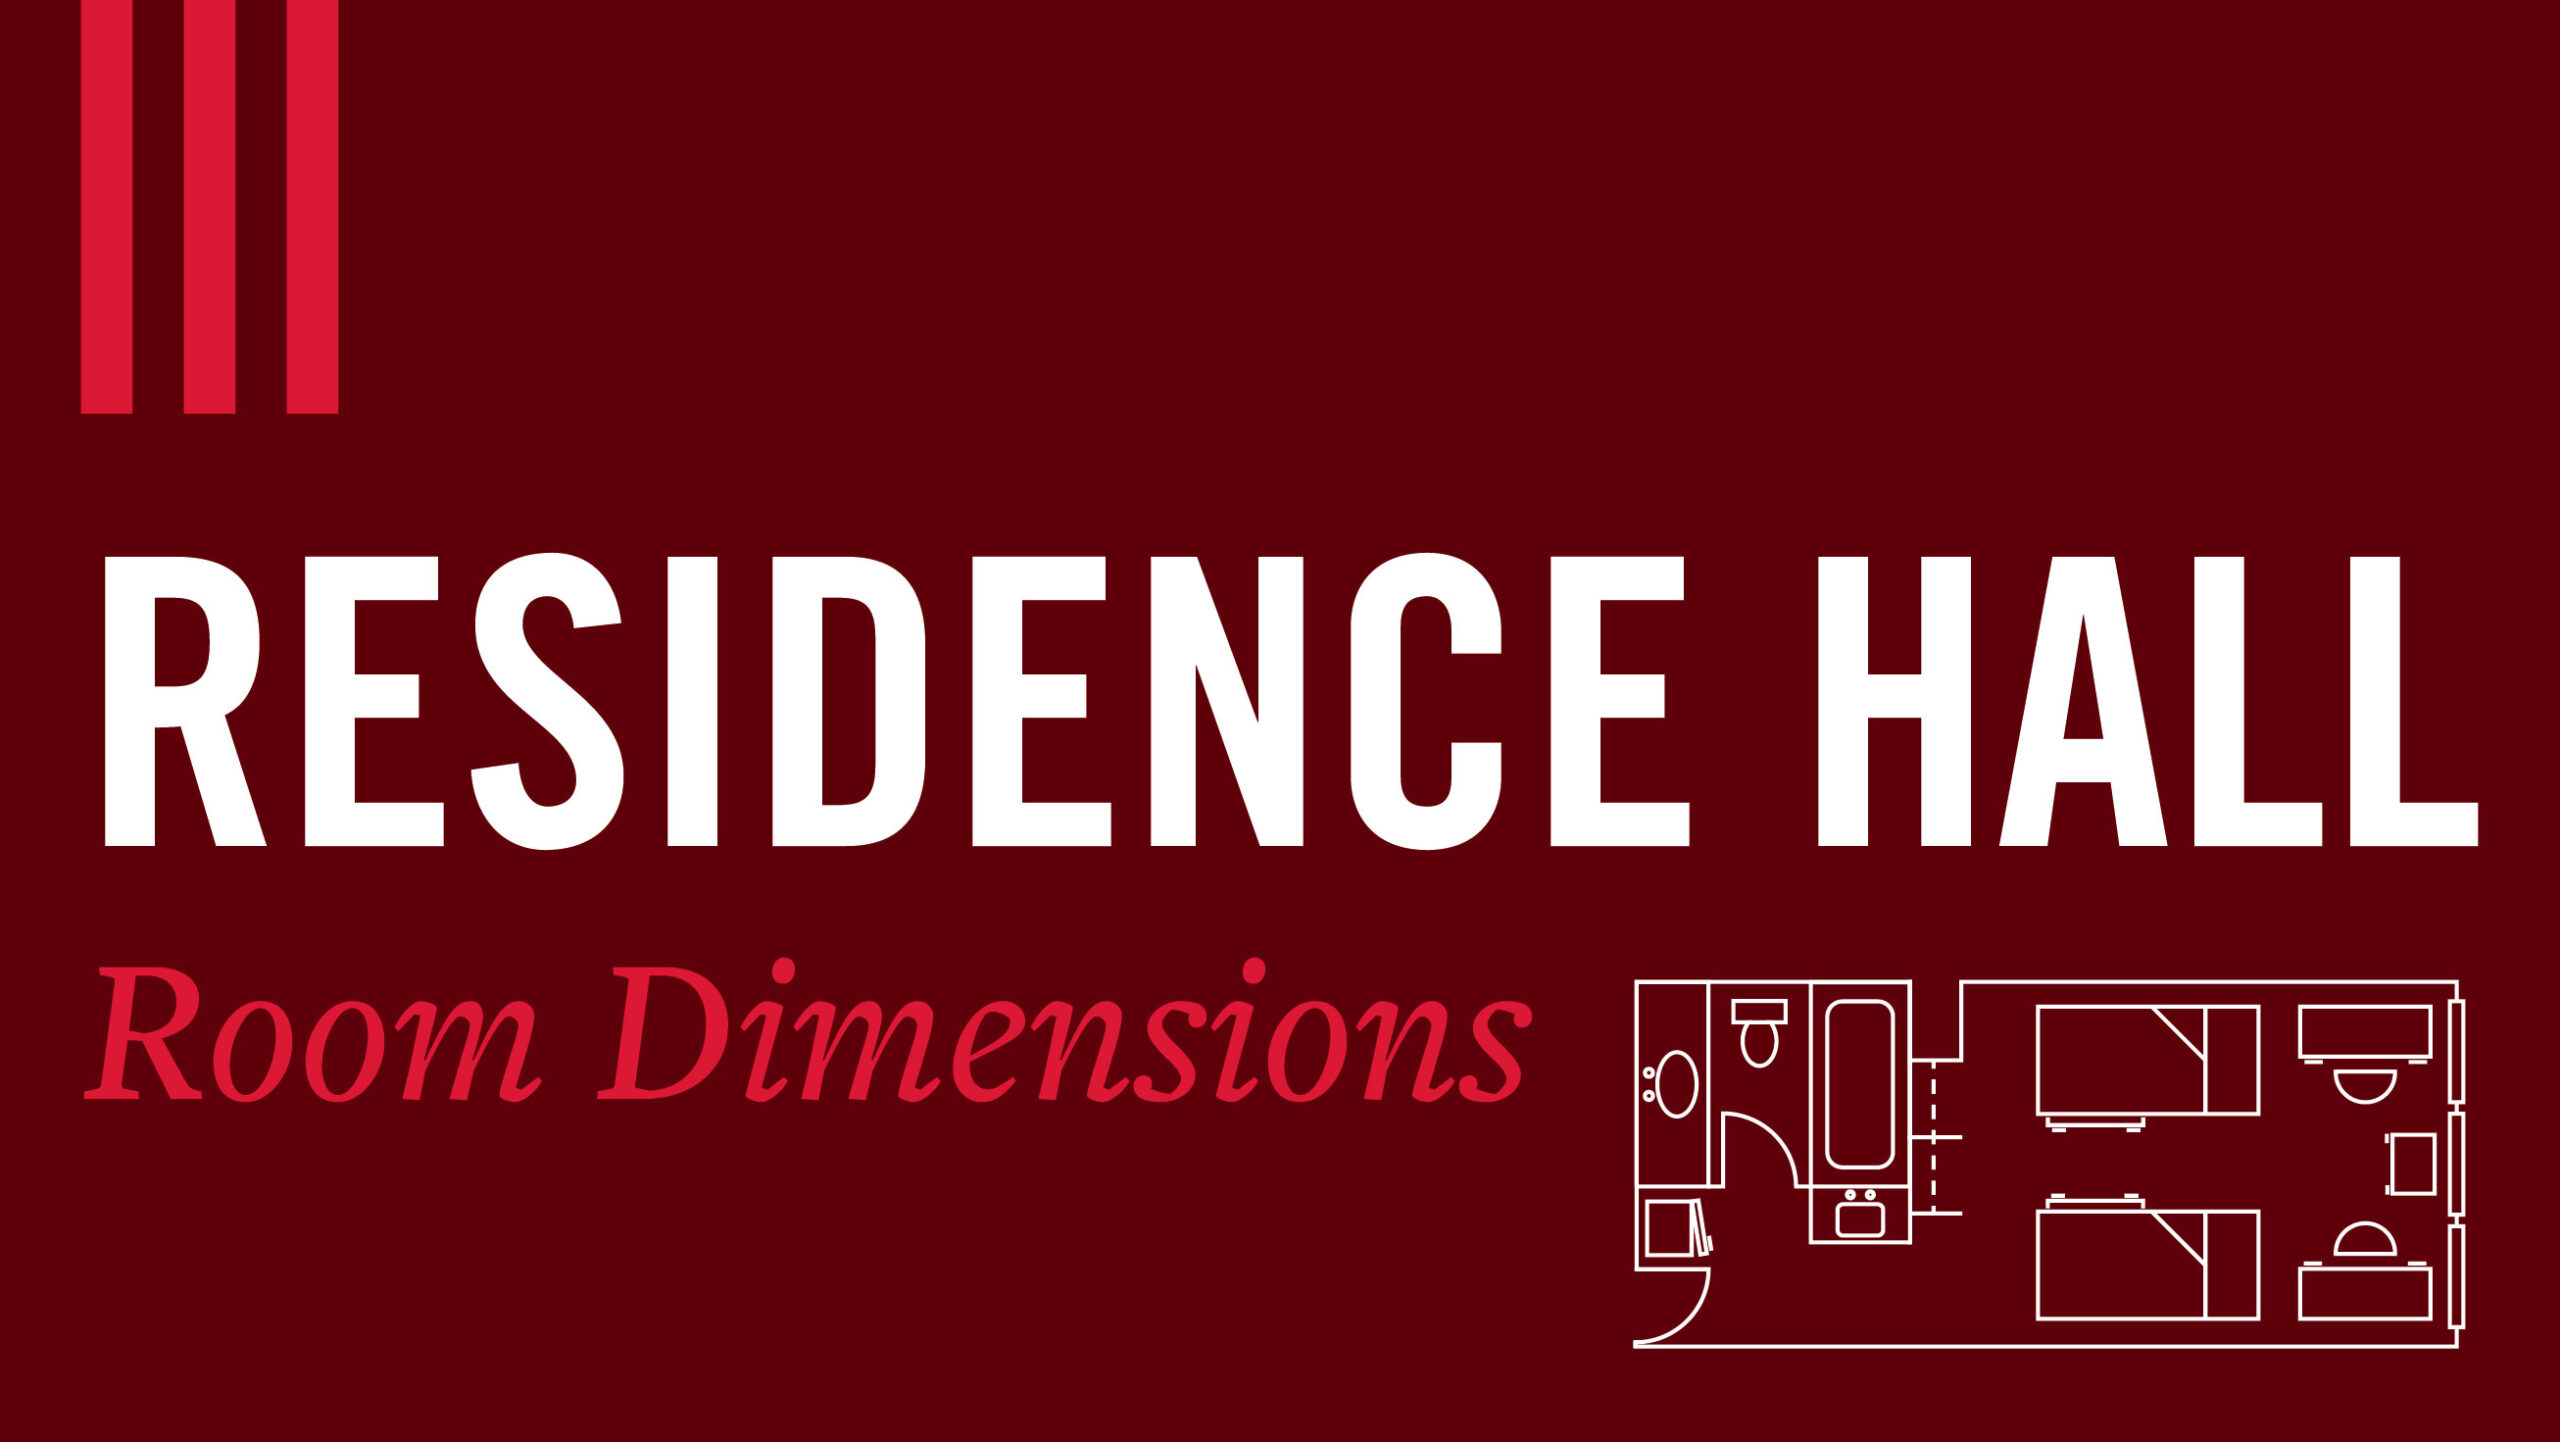 Residence Hall Room Dimensions